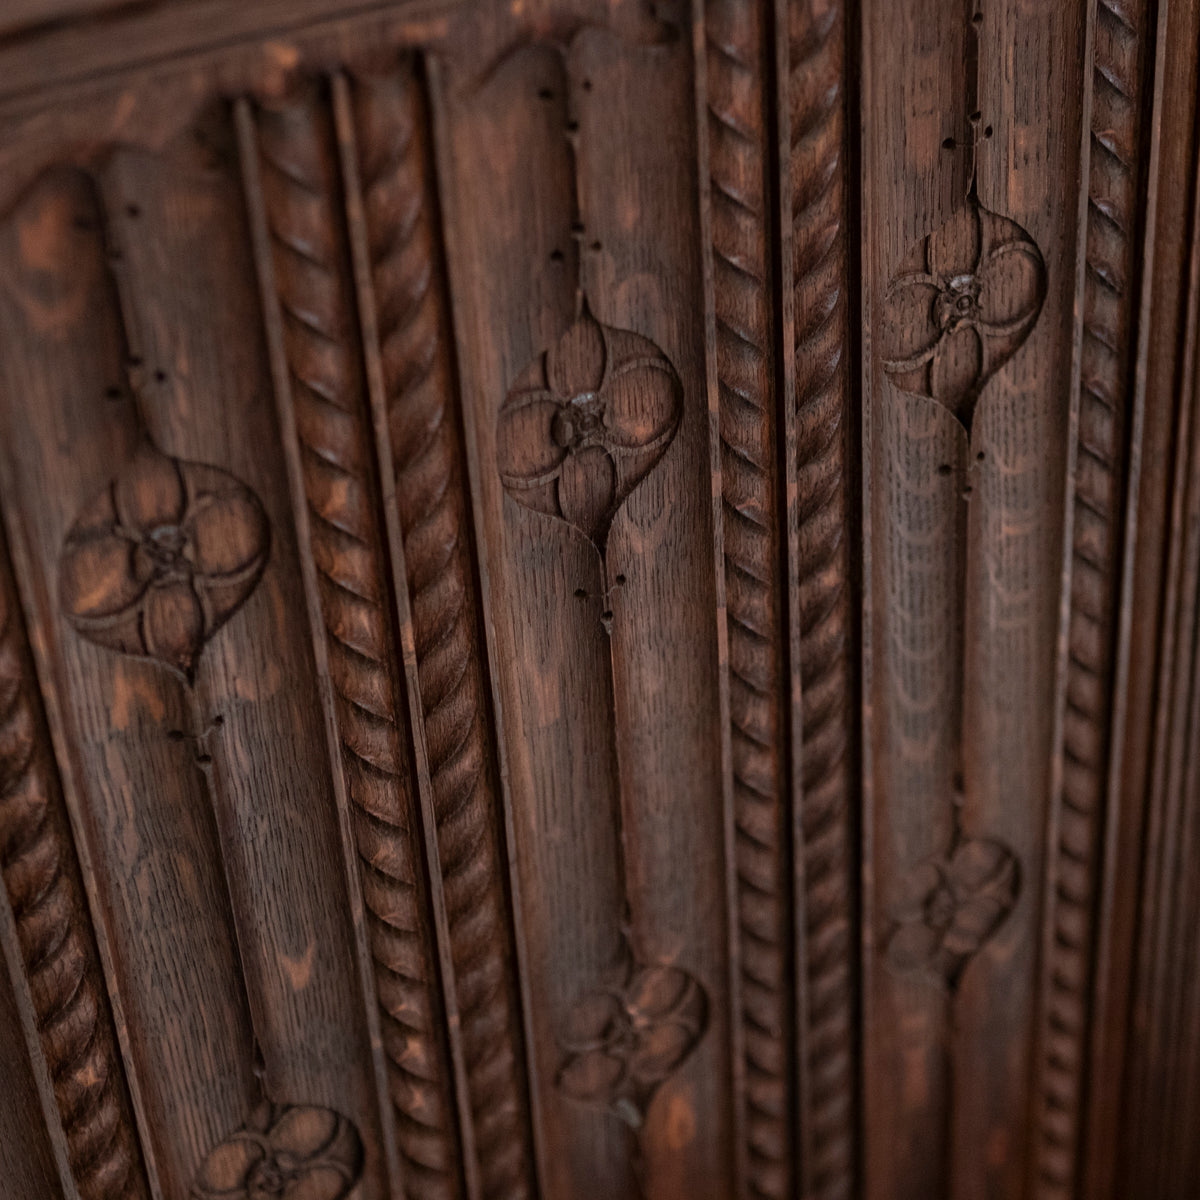 Antique Mid 19th Century Carved Linenfold Oak Panels | The Architectural Forum